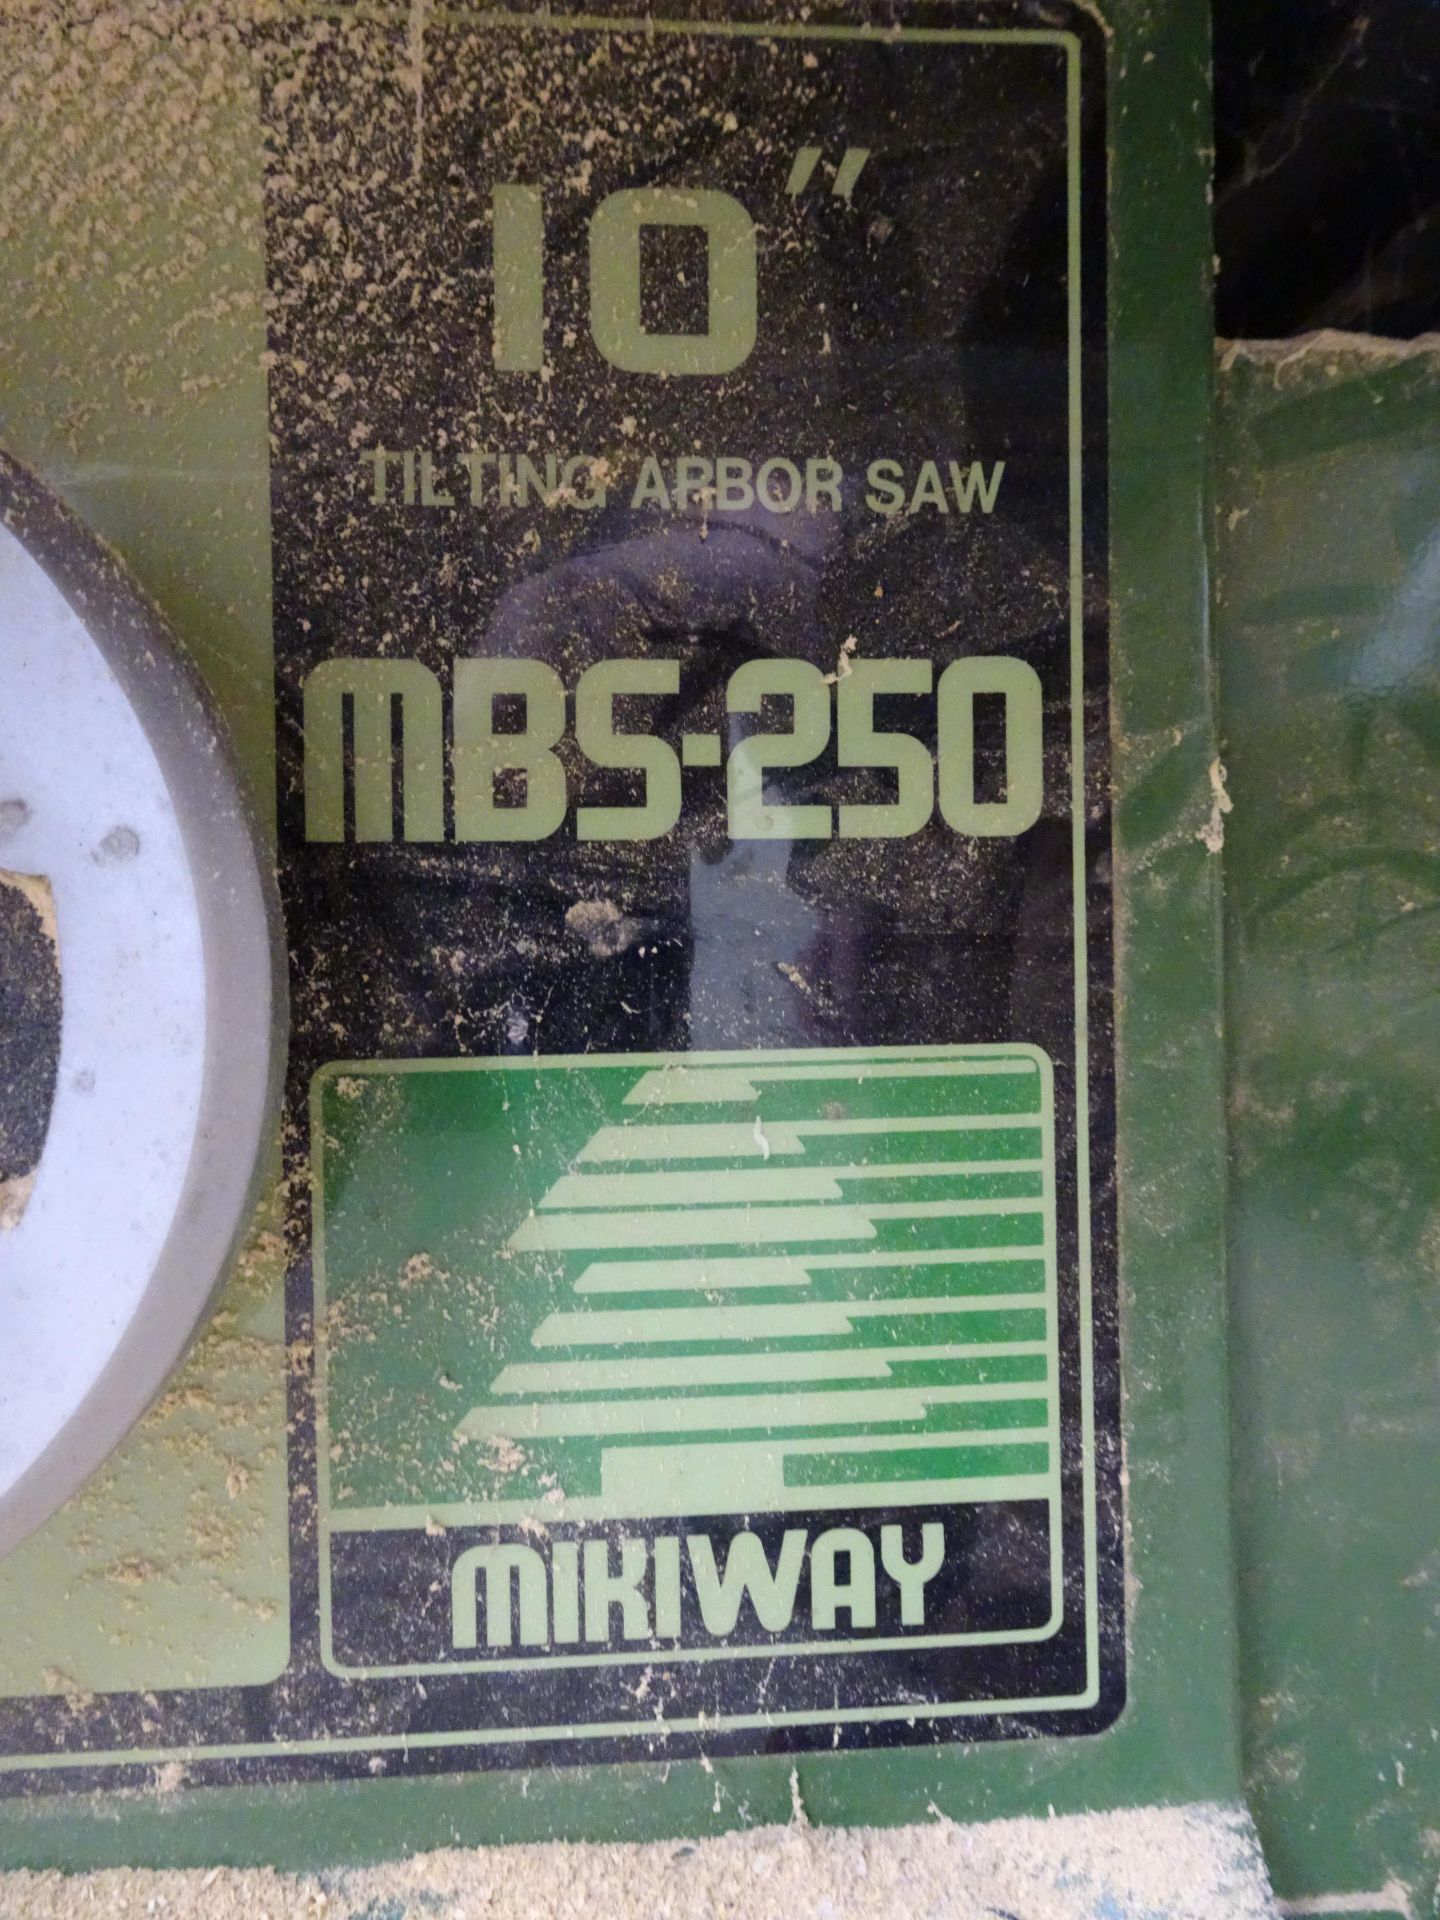 Mikiway Tilting Arbor Saw - Image 3 of 3